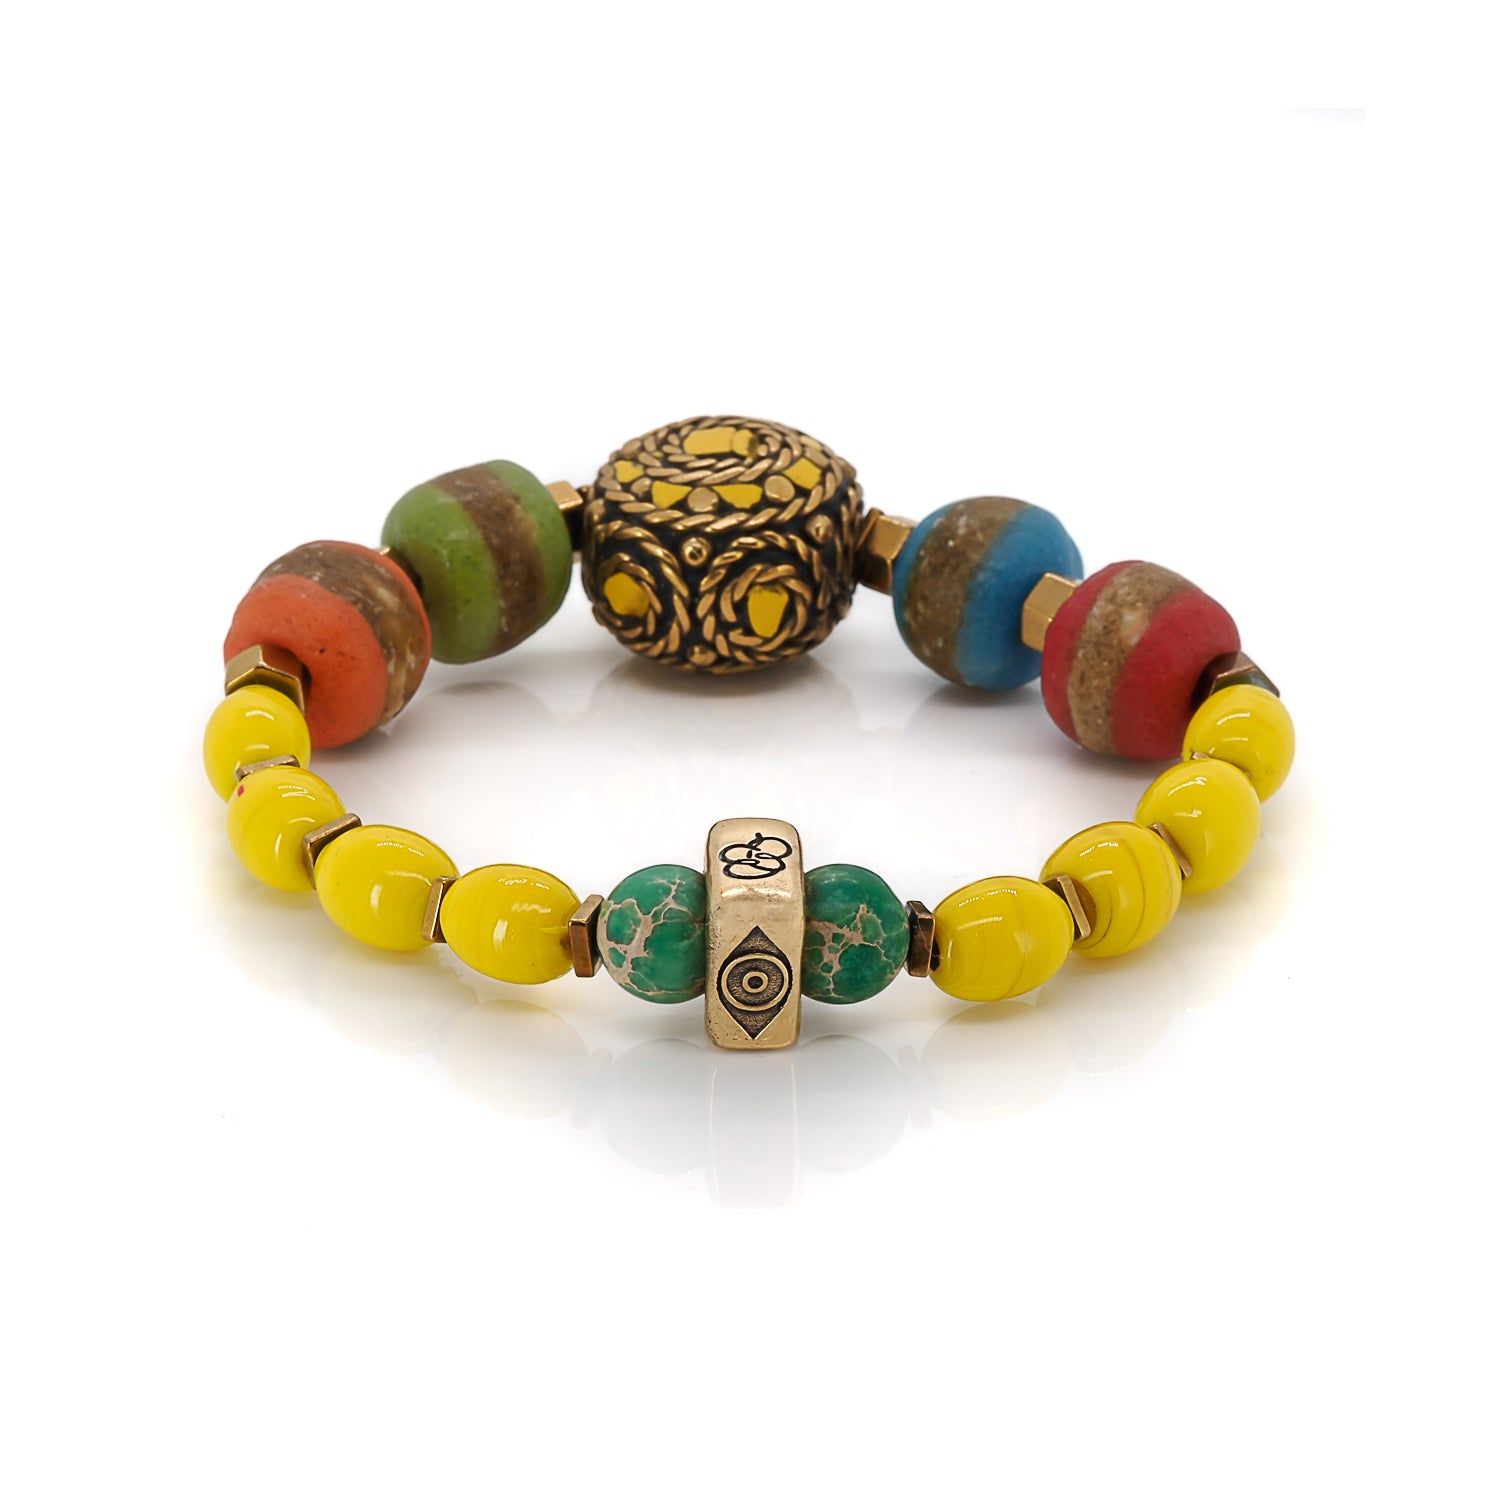 African Beads and Nepal Meditation Beads - A fusion of cultures and mindfulness.